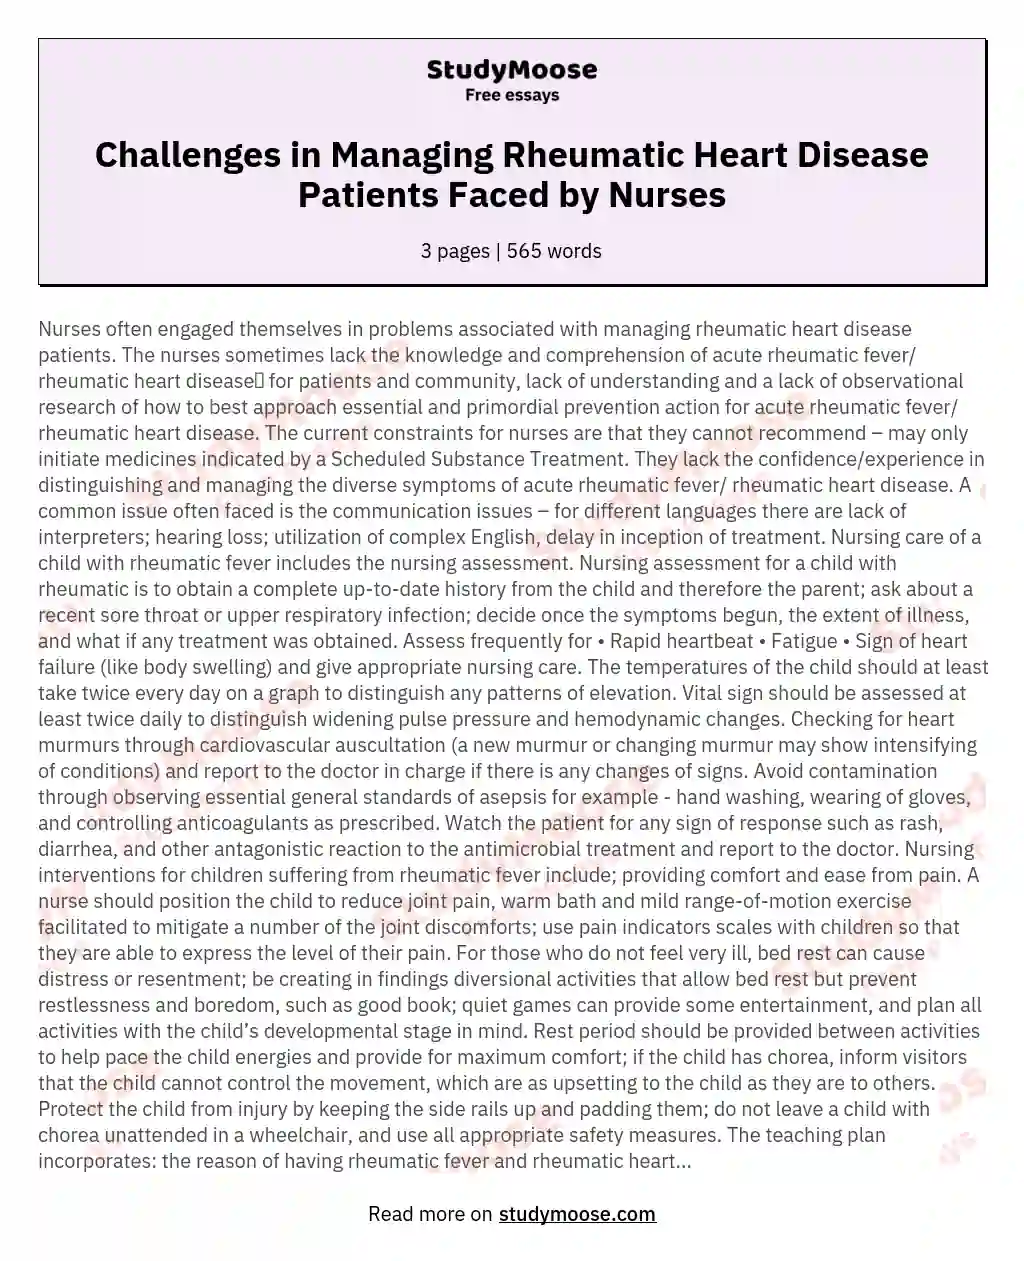 Challenges in Managing Rheumatic Heart Disease Patients Faced by Nurses essay